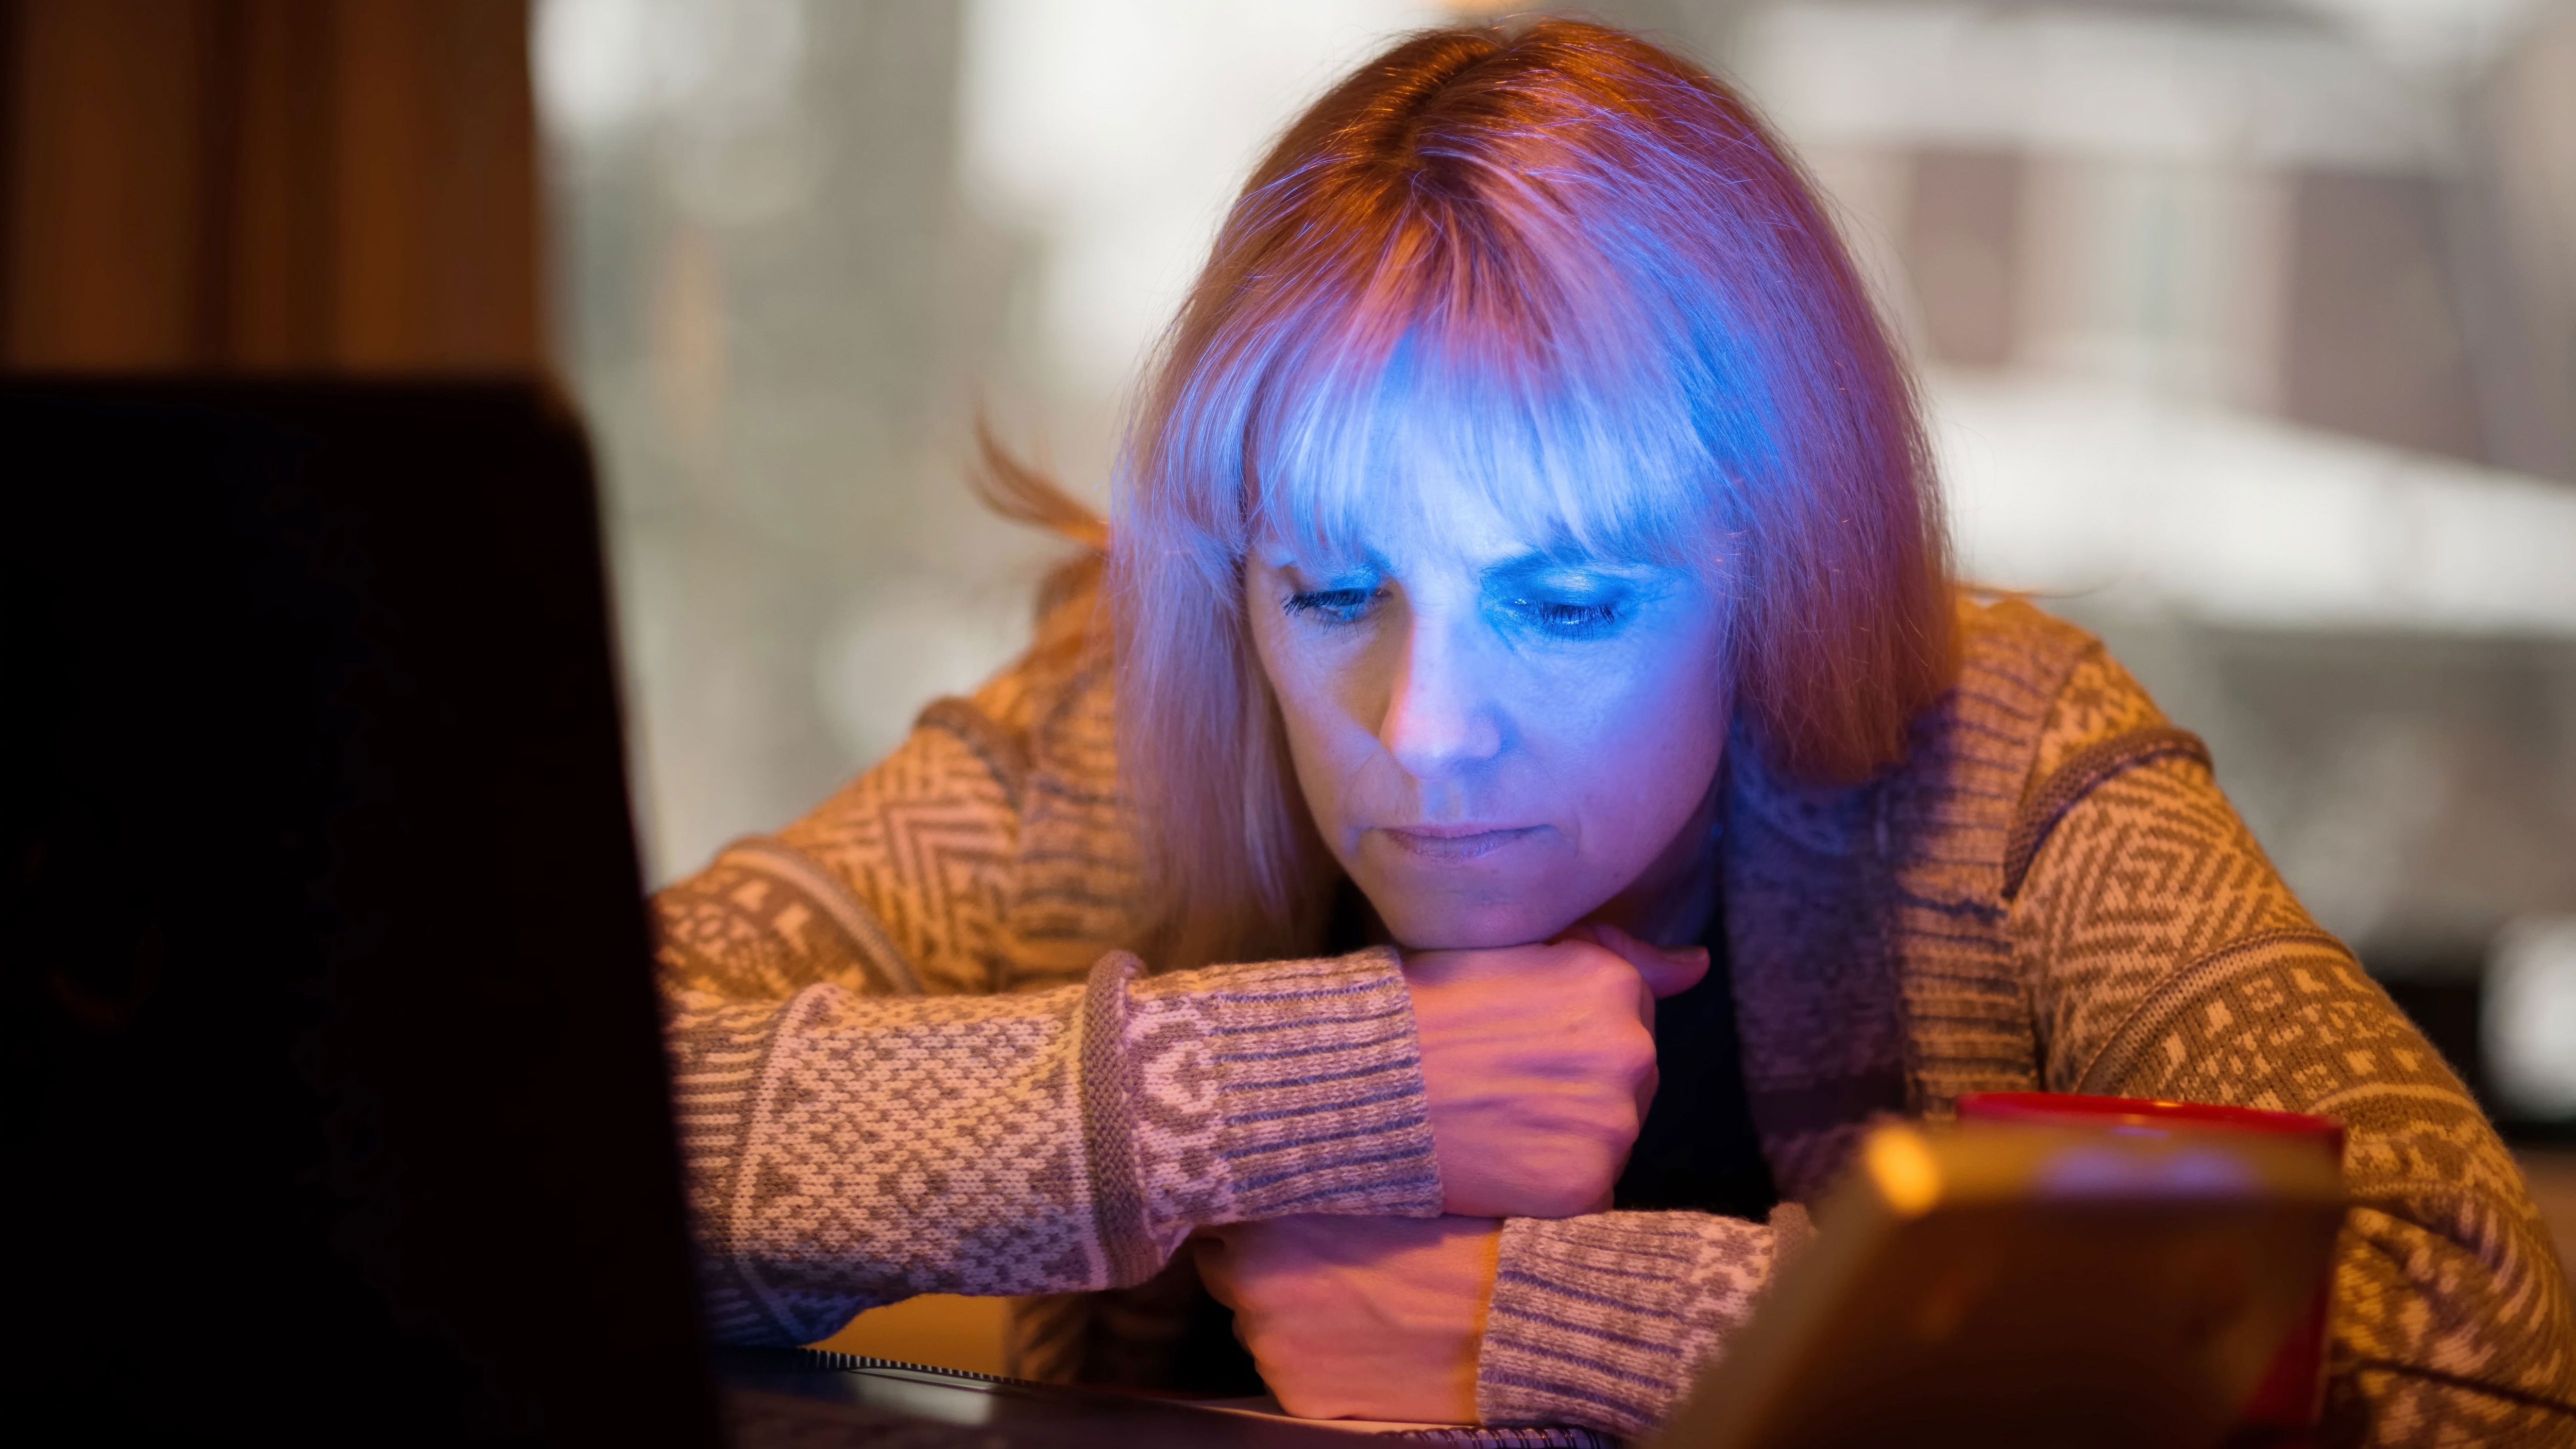 A middle aged woman sitting in front of a blue light to treat seasonal affective disorder